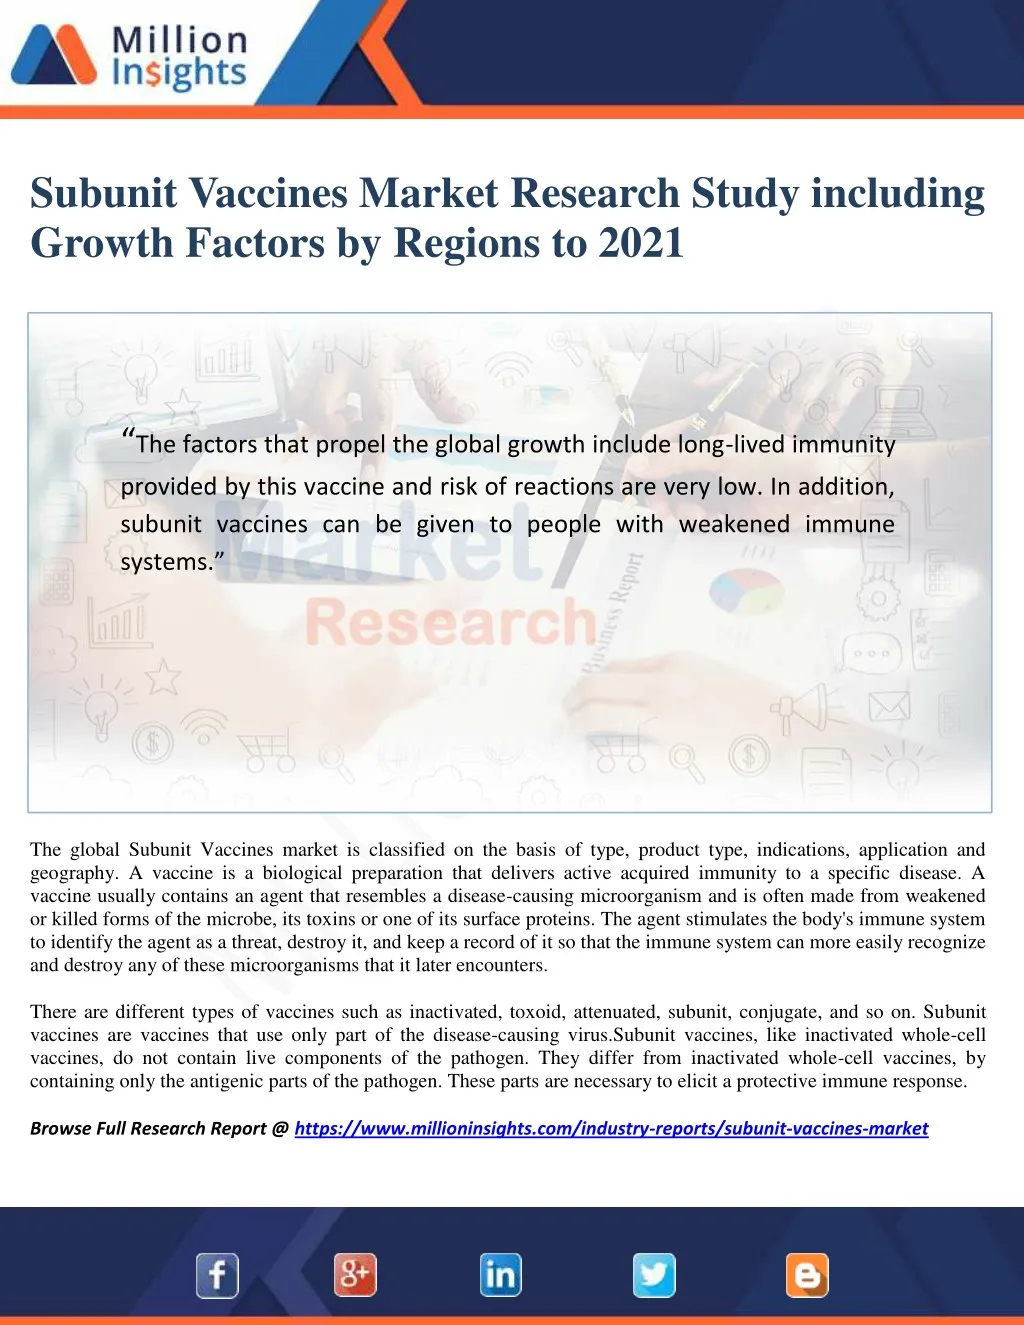 subunit vaccines market research study including